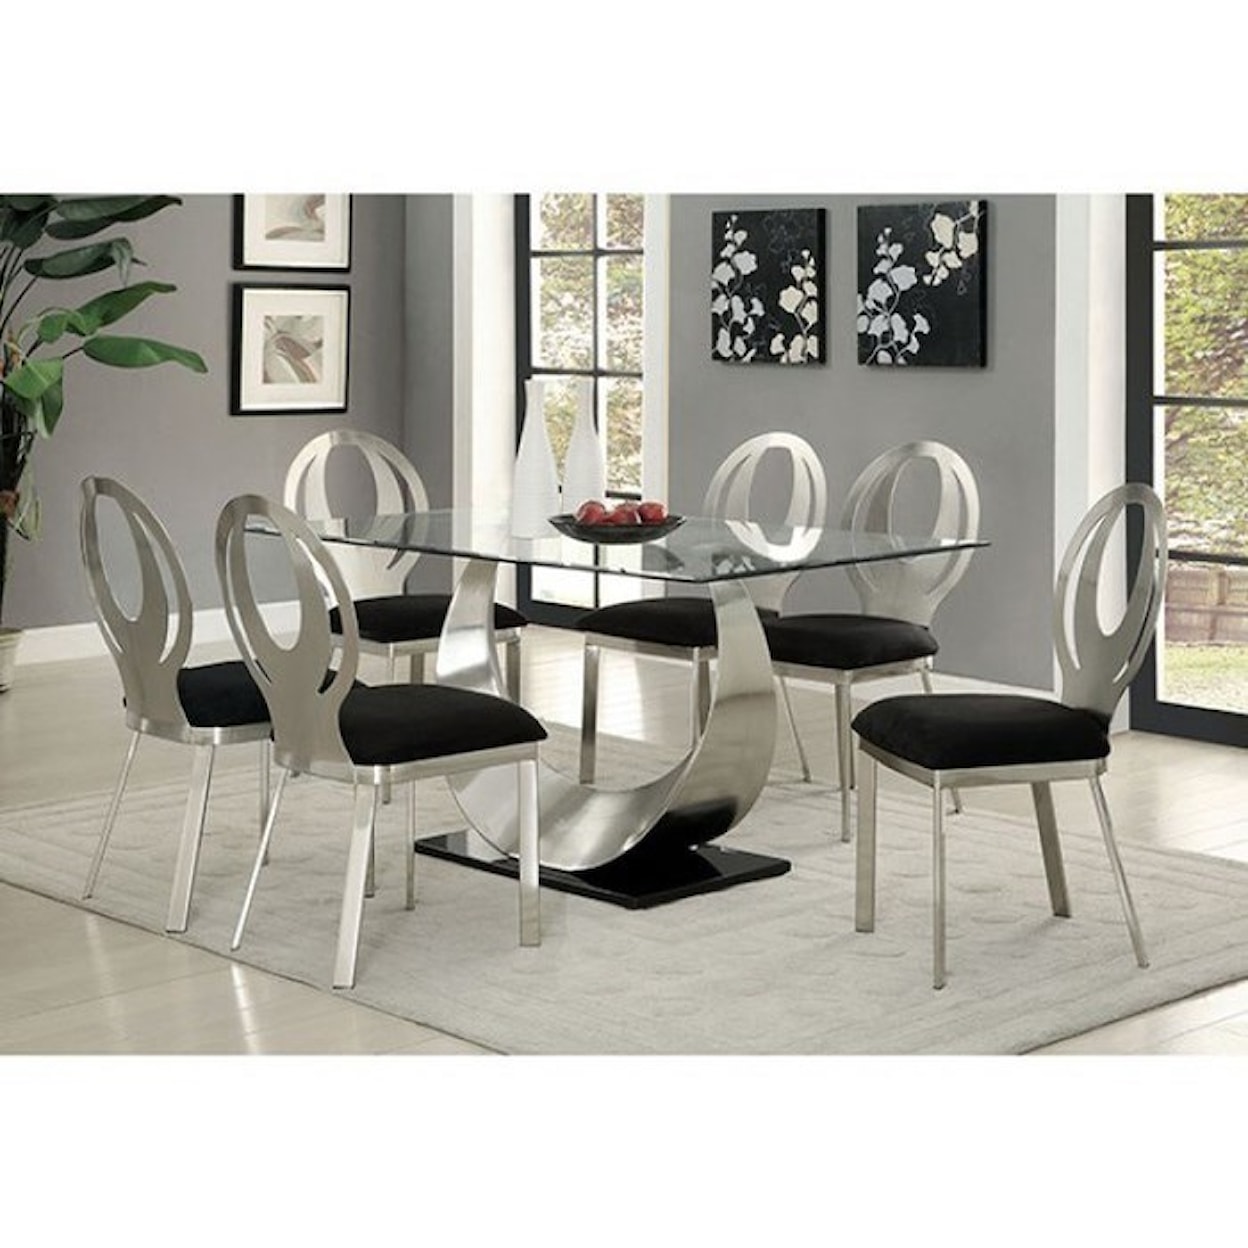 Furniture of America Orla Table and 6 Side Chairs